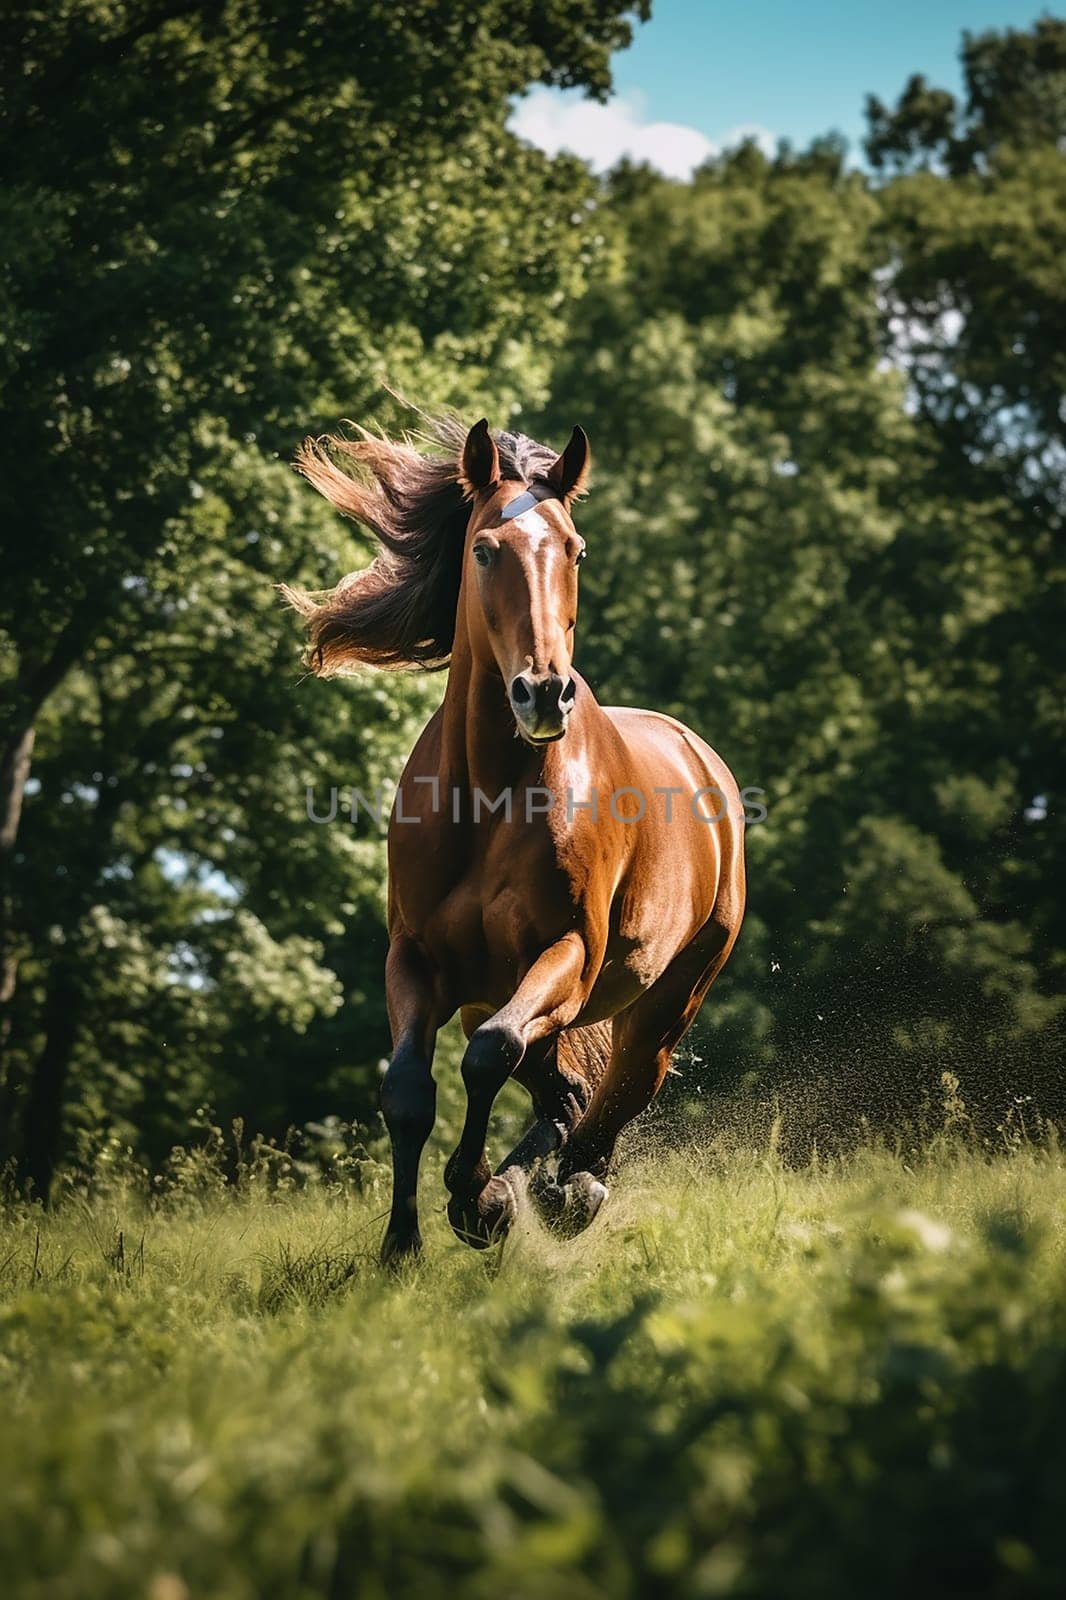 A beautiful horse running free in nature, freedom by Hype2art